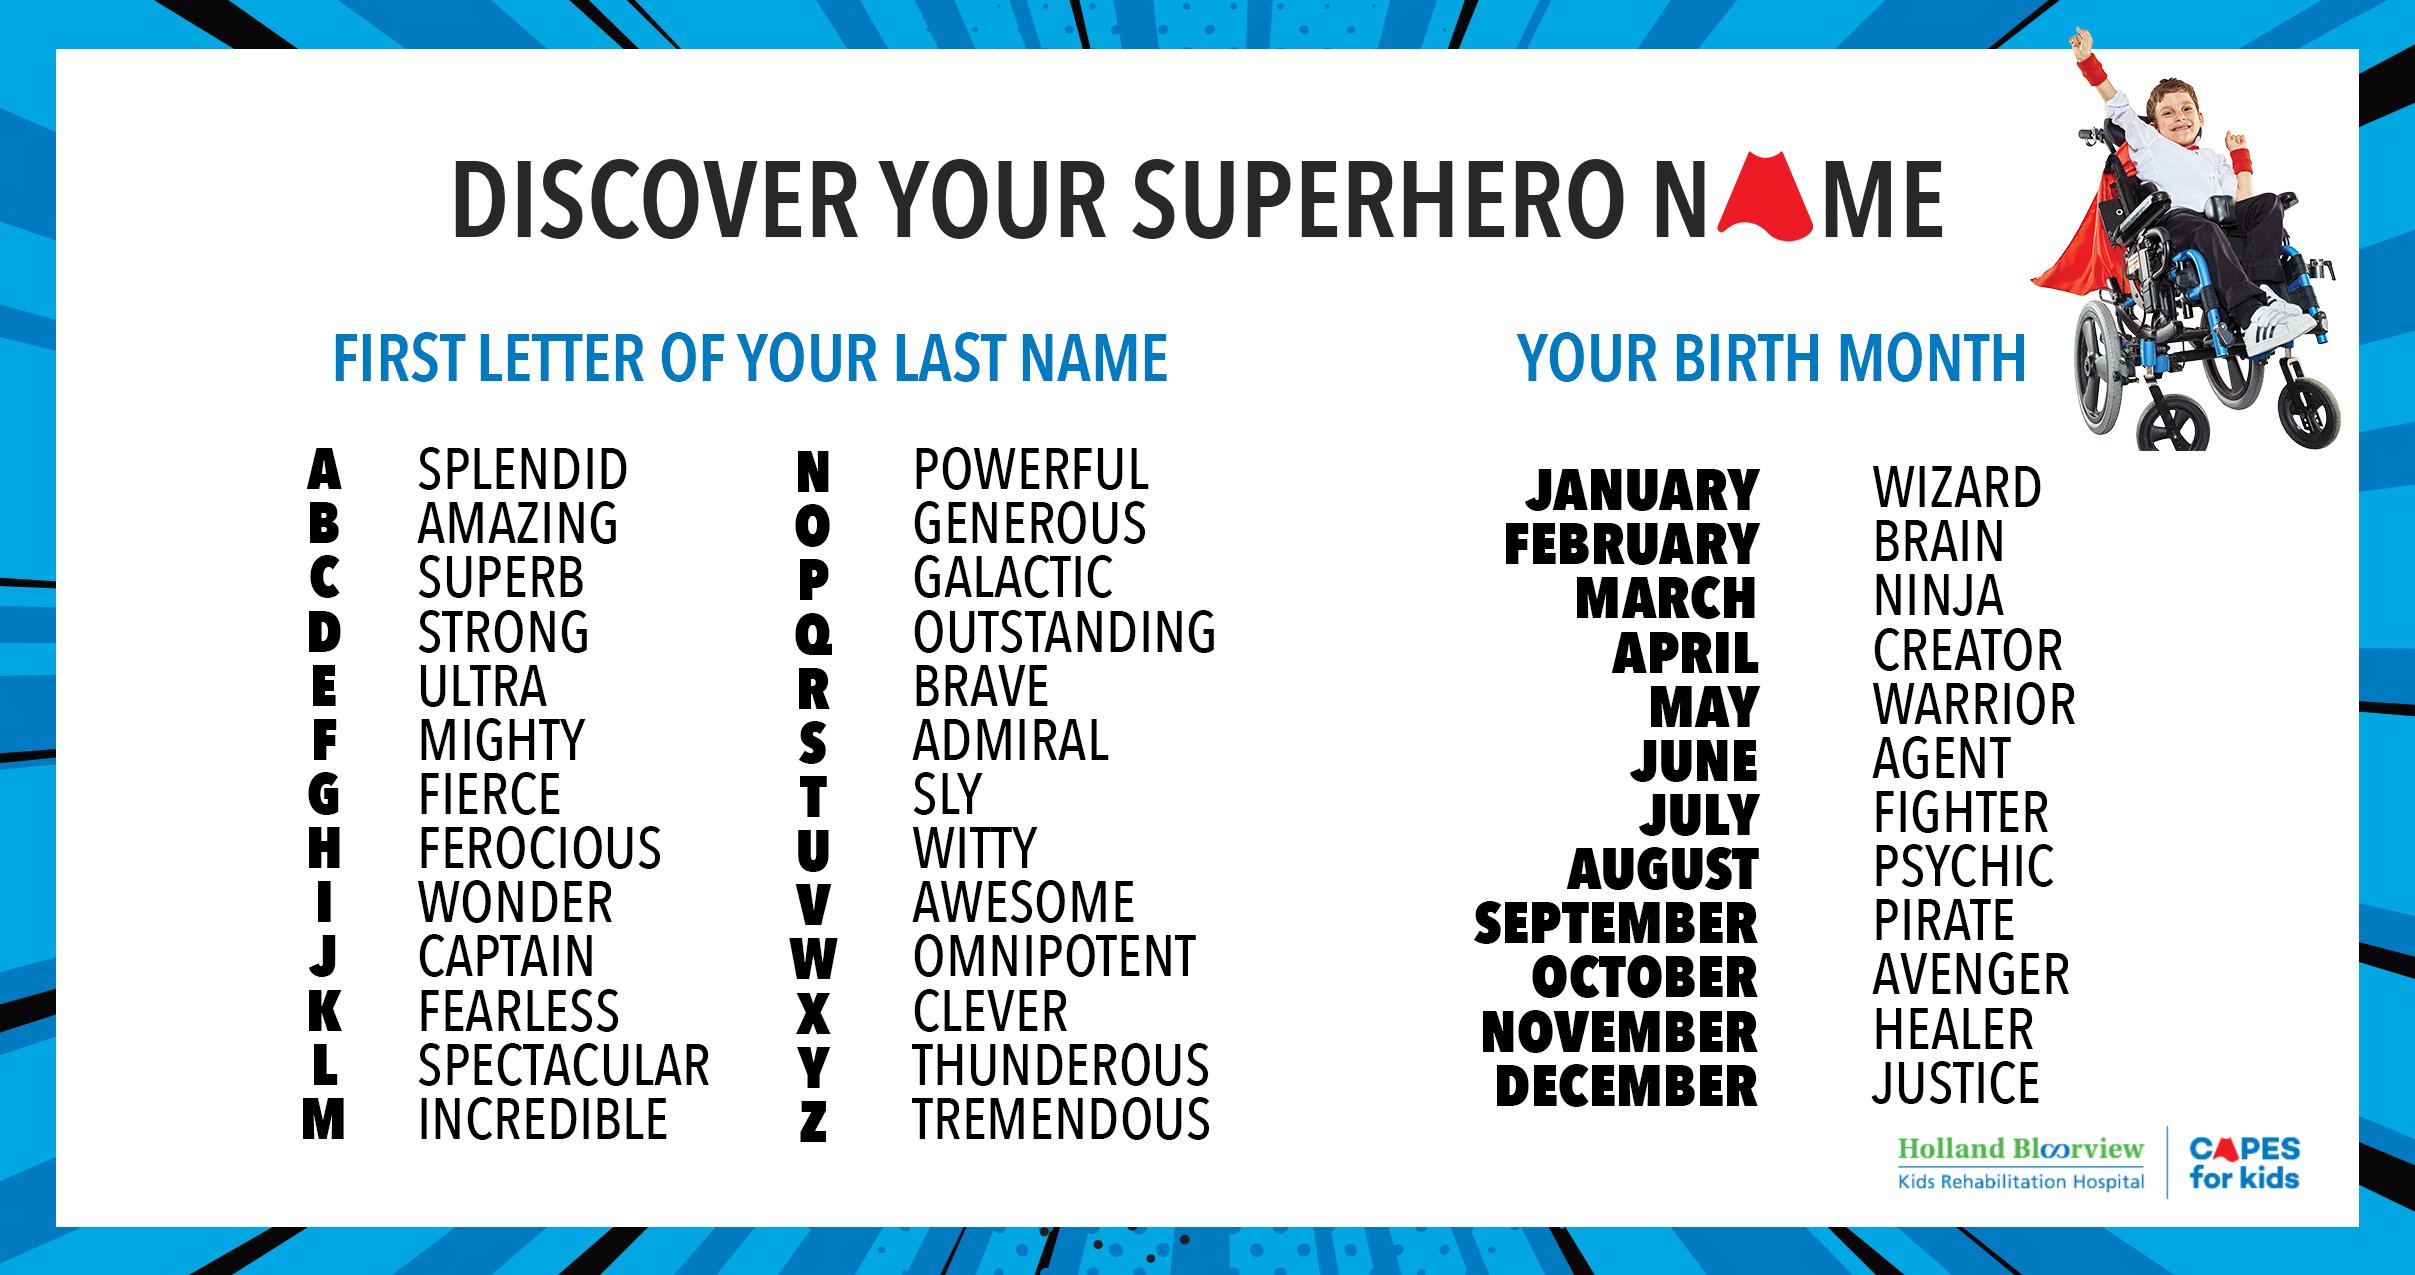 Holland Bloorview on Twitter: "Have you ever wondered what superhero name would be? 🦸‍♀️ Now you can find out using our #CapesForKids superhero name generator! Comment below with your new name!